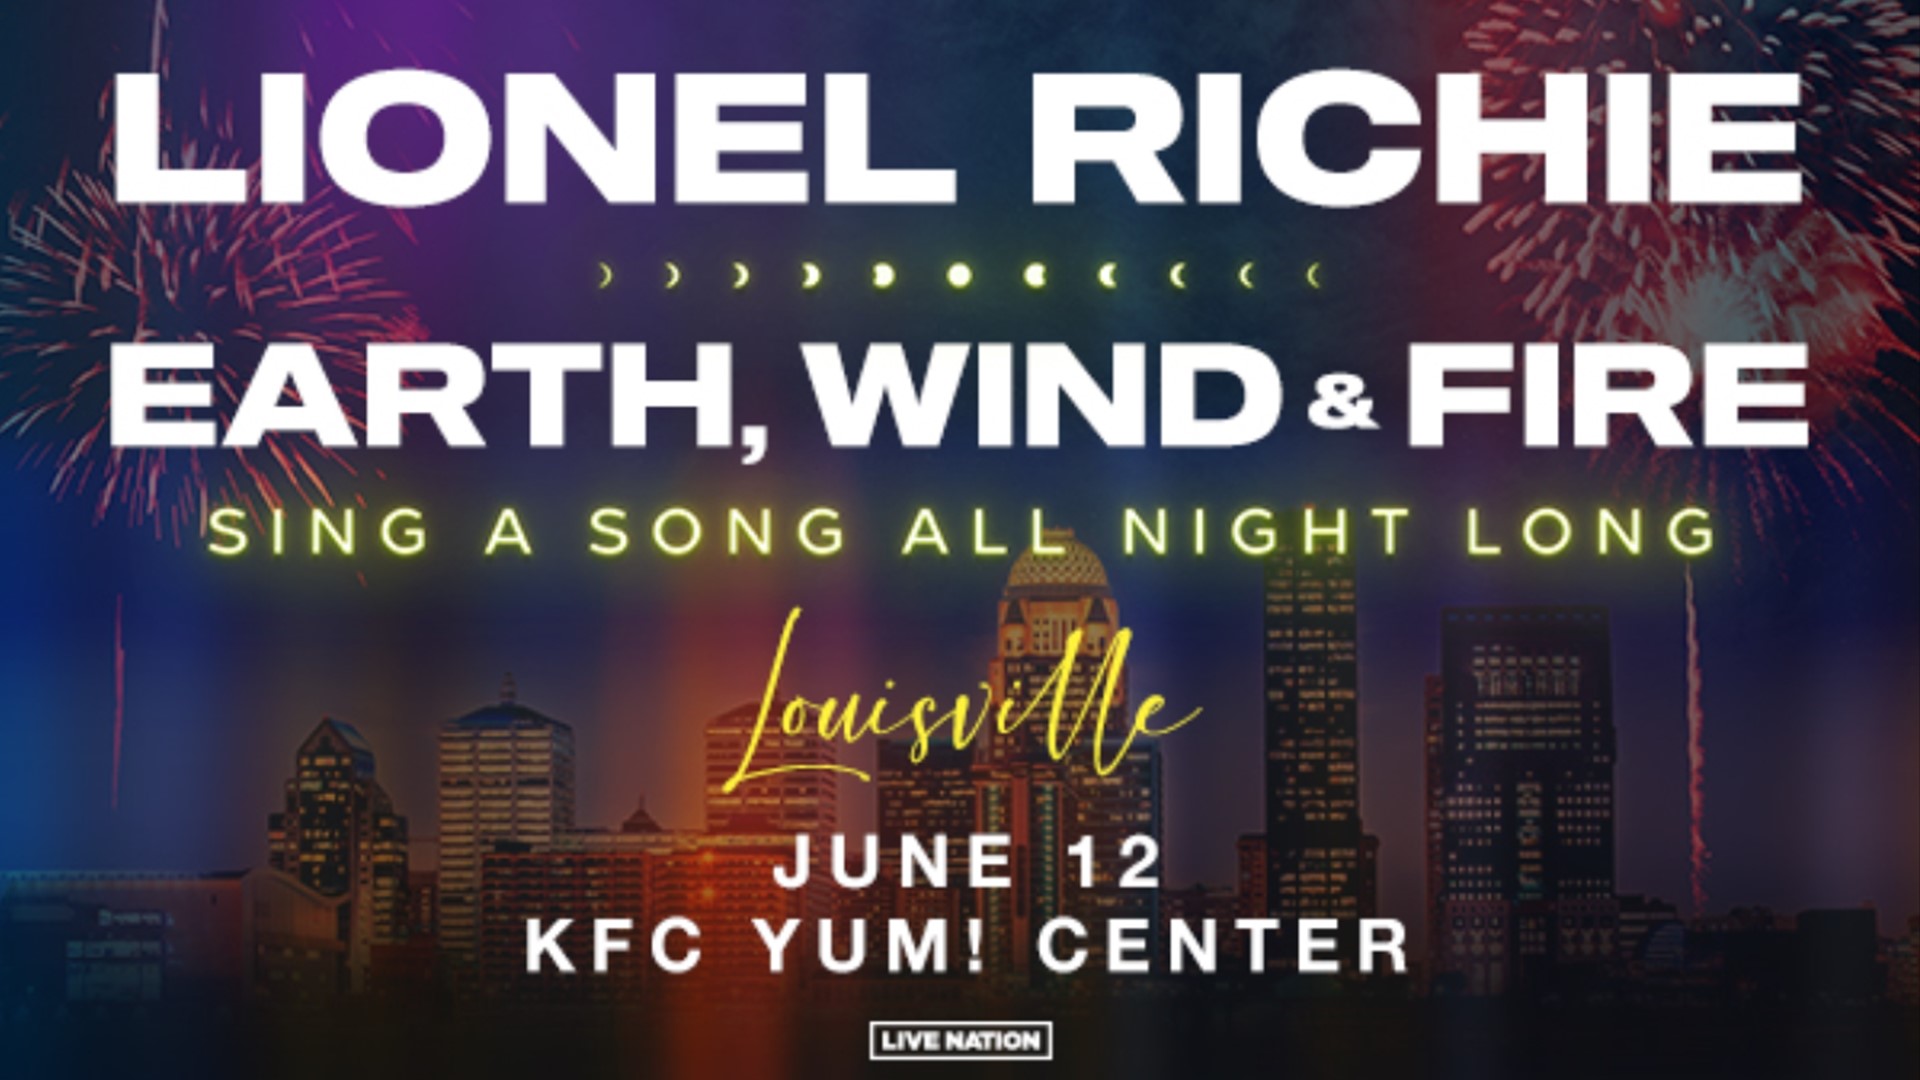 Two trailblazing artists are teaming up to make an unforgettable evening at the KFC Yum! Center this year.